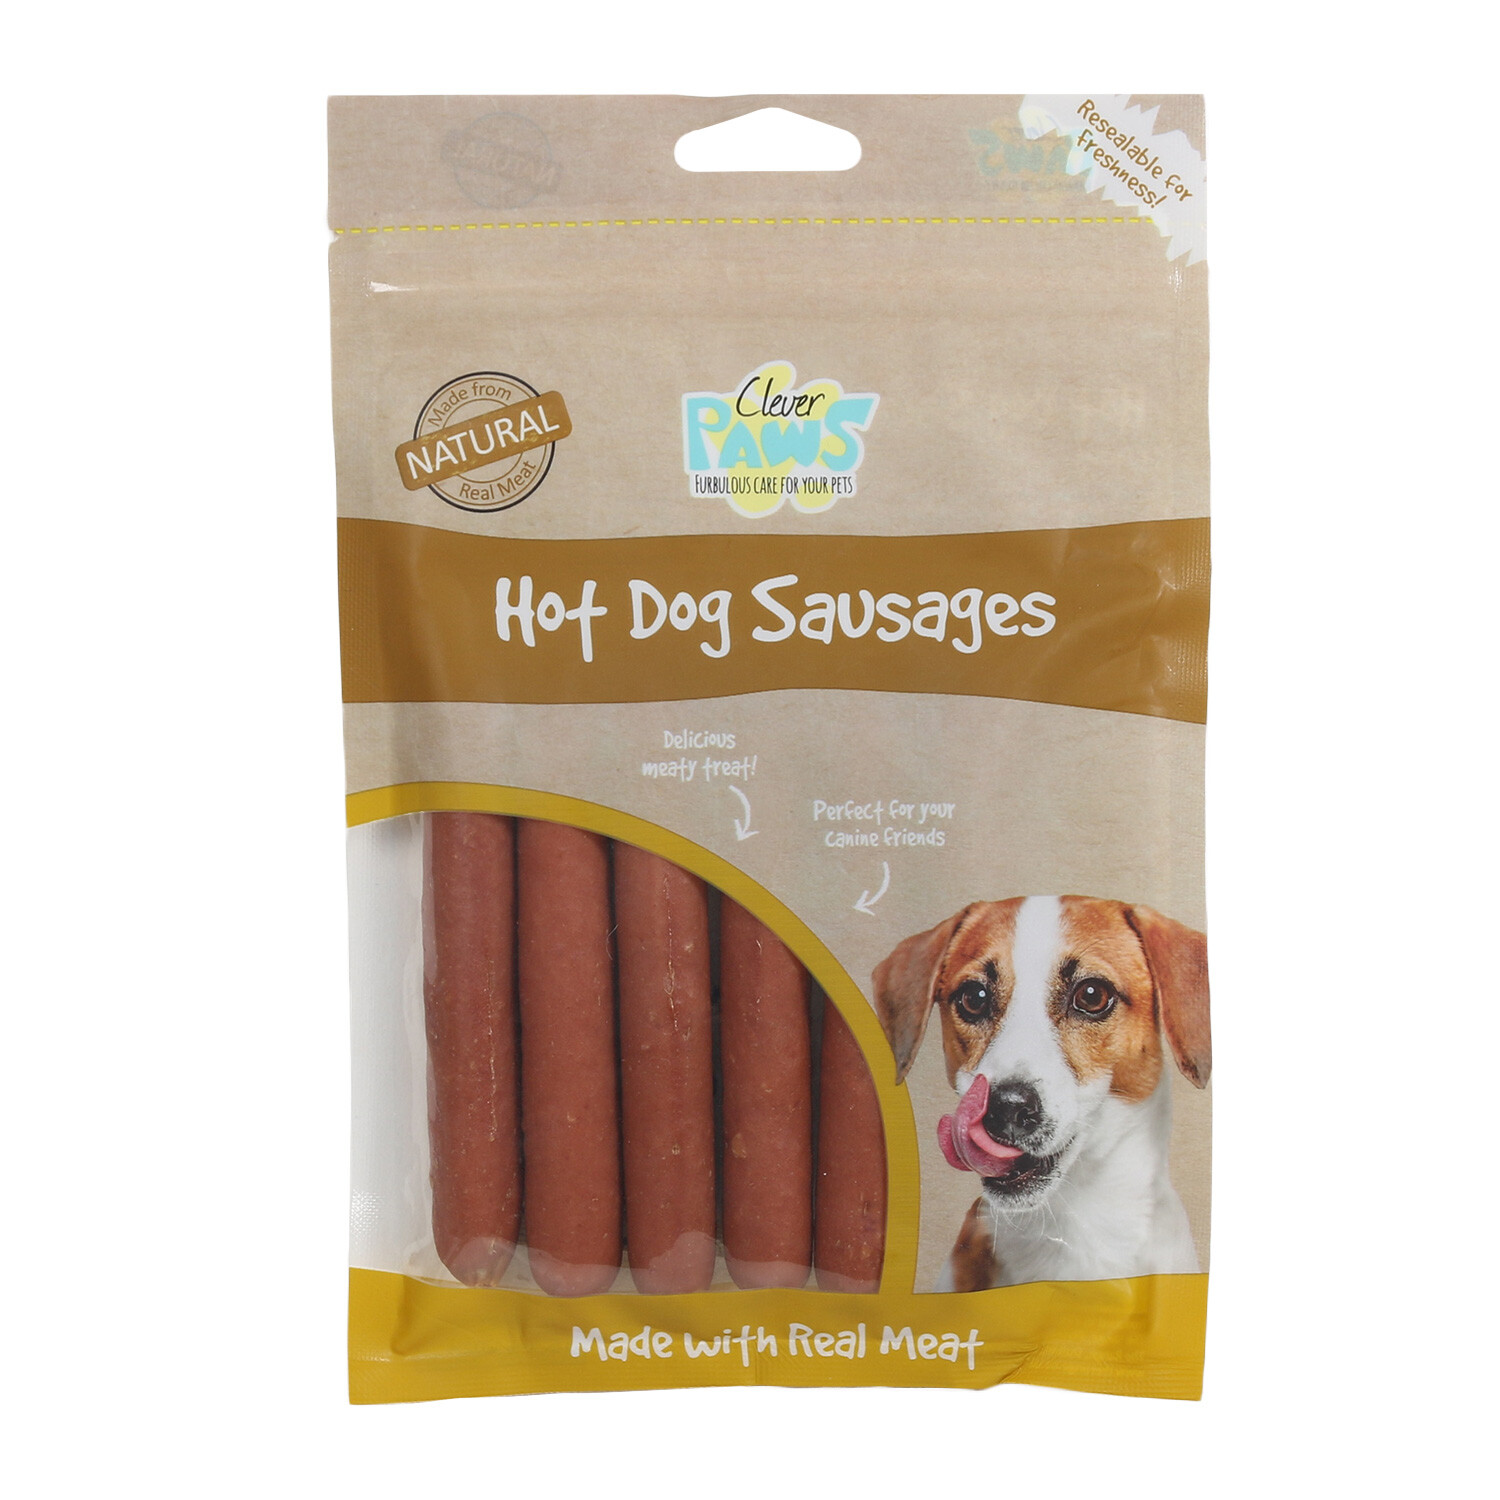 Clever Paws Hot Dog Sausages Dog Treat Image 1